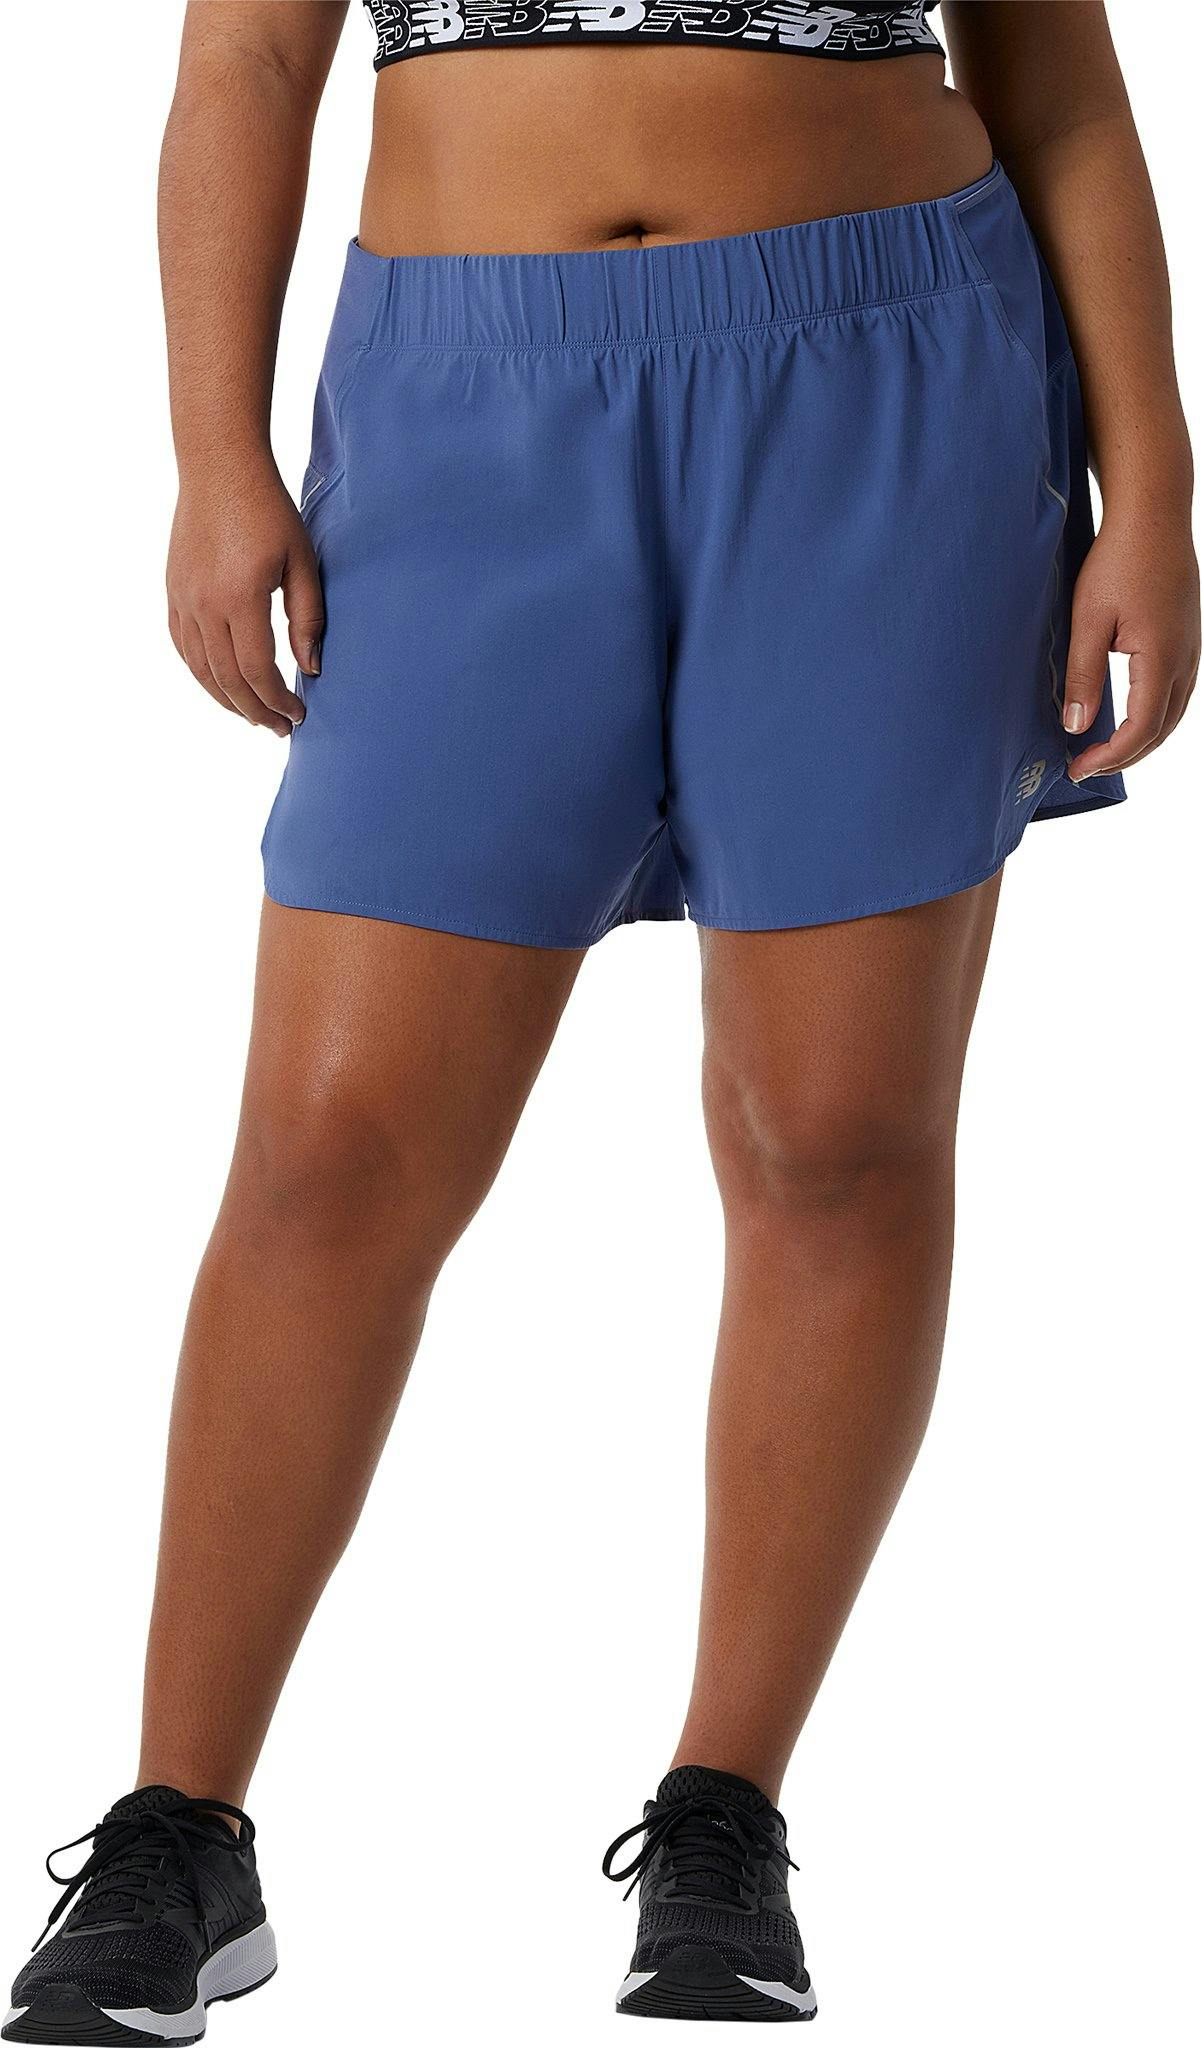 Product image for Impact Run 5 inch plus size Shorts - Women's